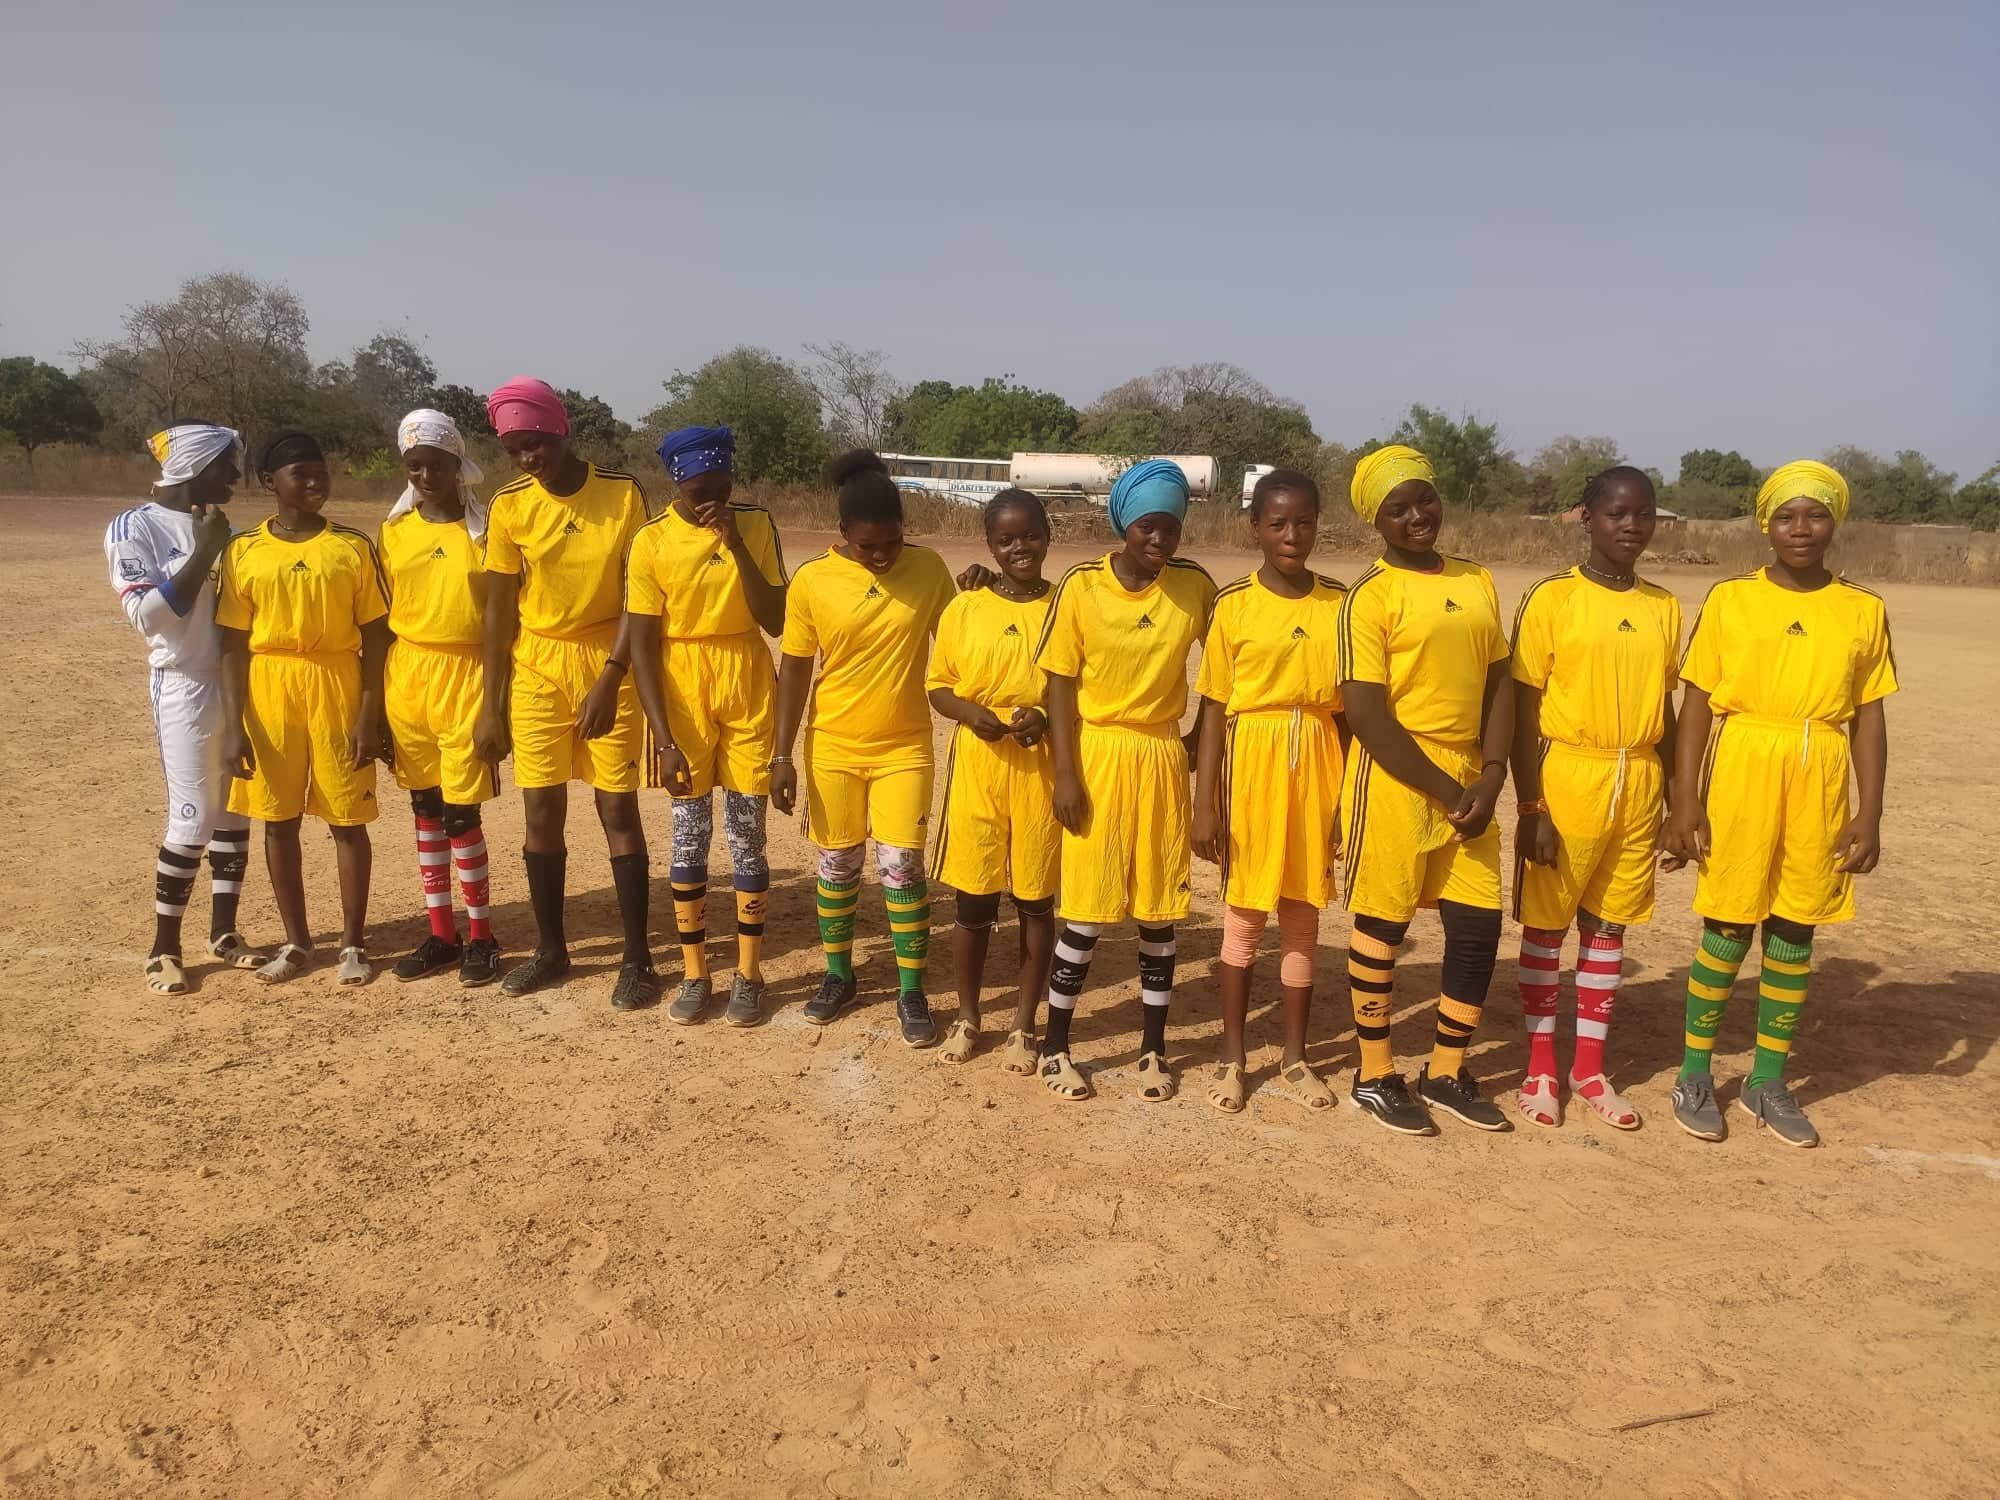 The current girls of Zambougou prepare to play.